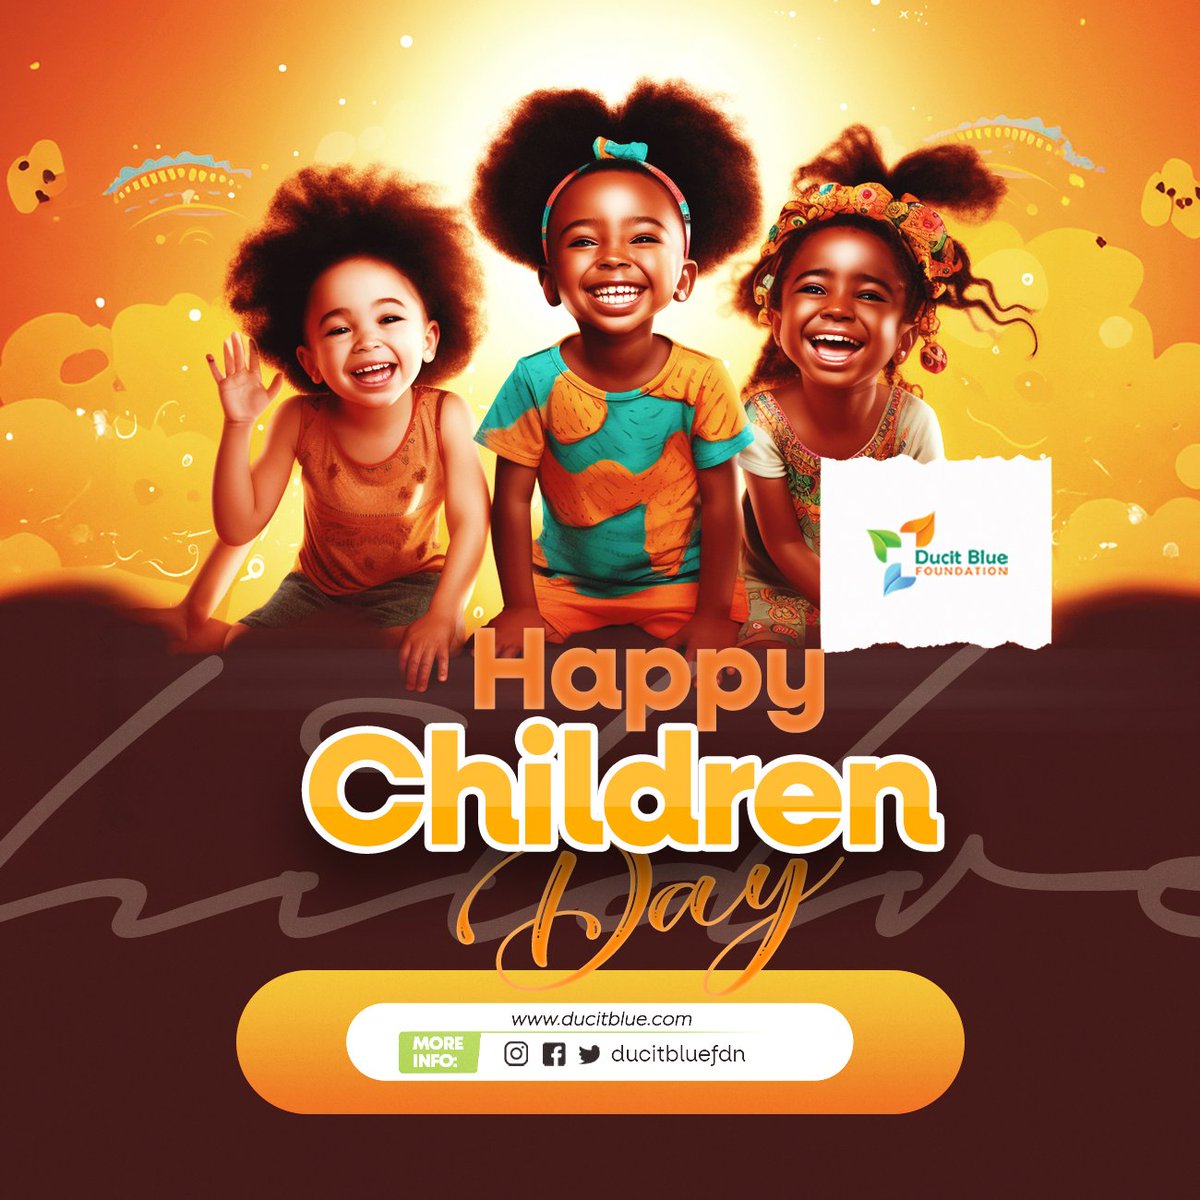 Happy Children's Day! Let's celebrate by giving them the gift of health. #Immunization is the best defense against preventable diseases. Protect your little ones, get them vaccinated! #HappyChildrensDay #VaccinateForLife